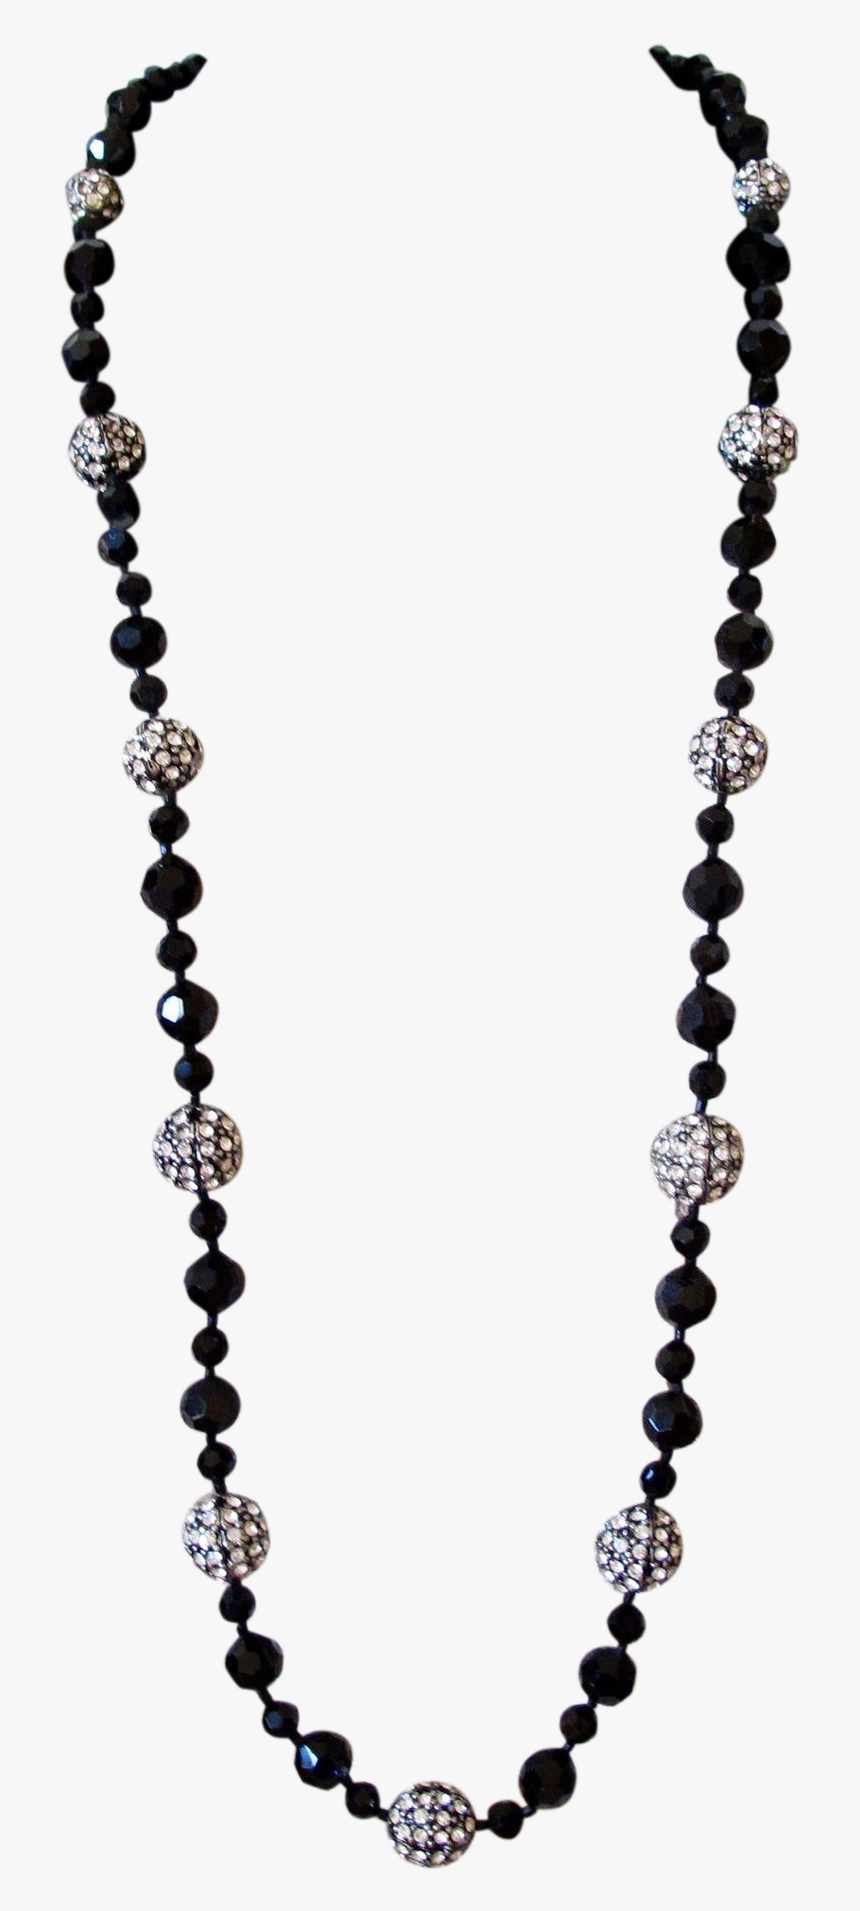 Necklace Clipart Swag - Mala Bead Necklace Png, Transparent Png, Free Download